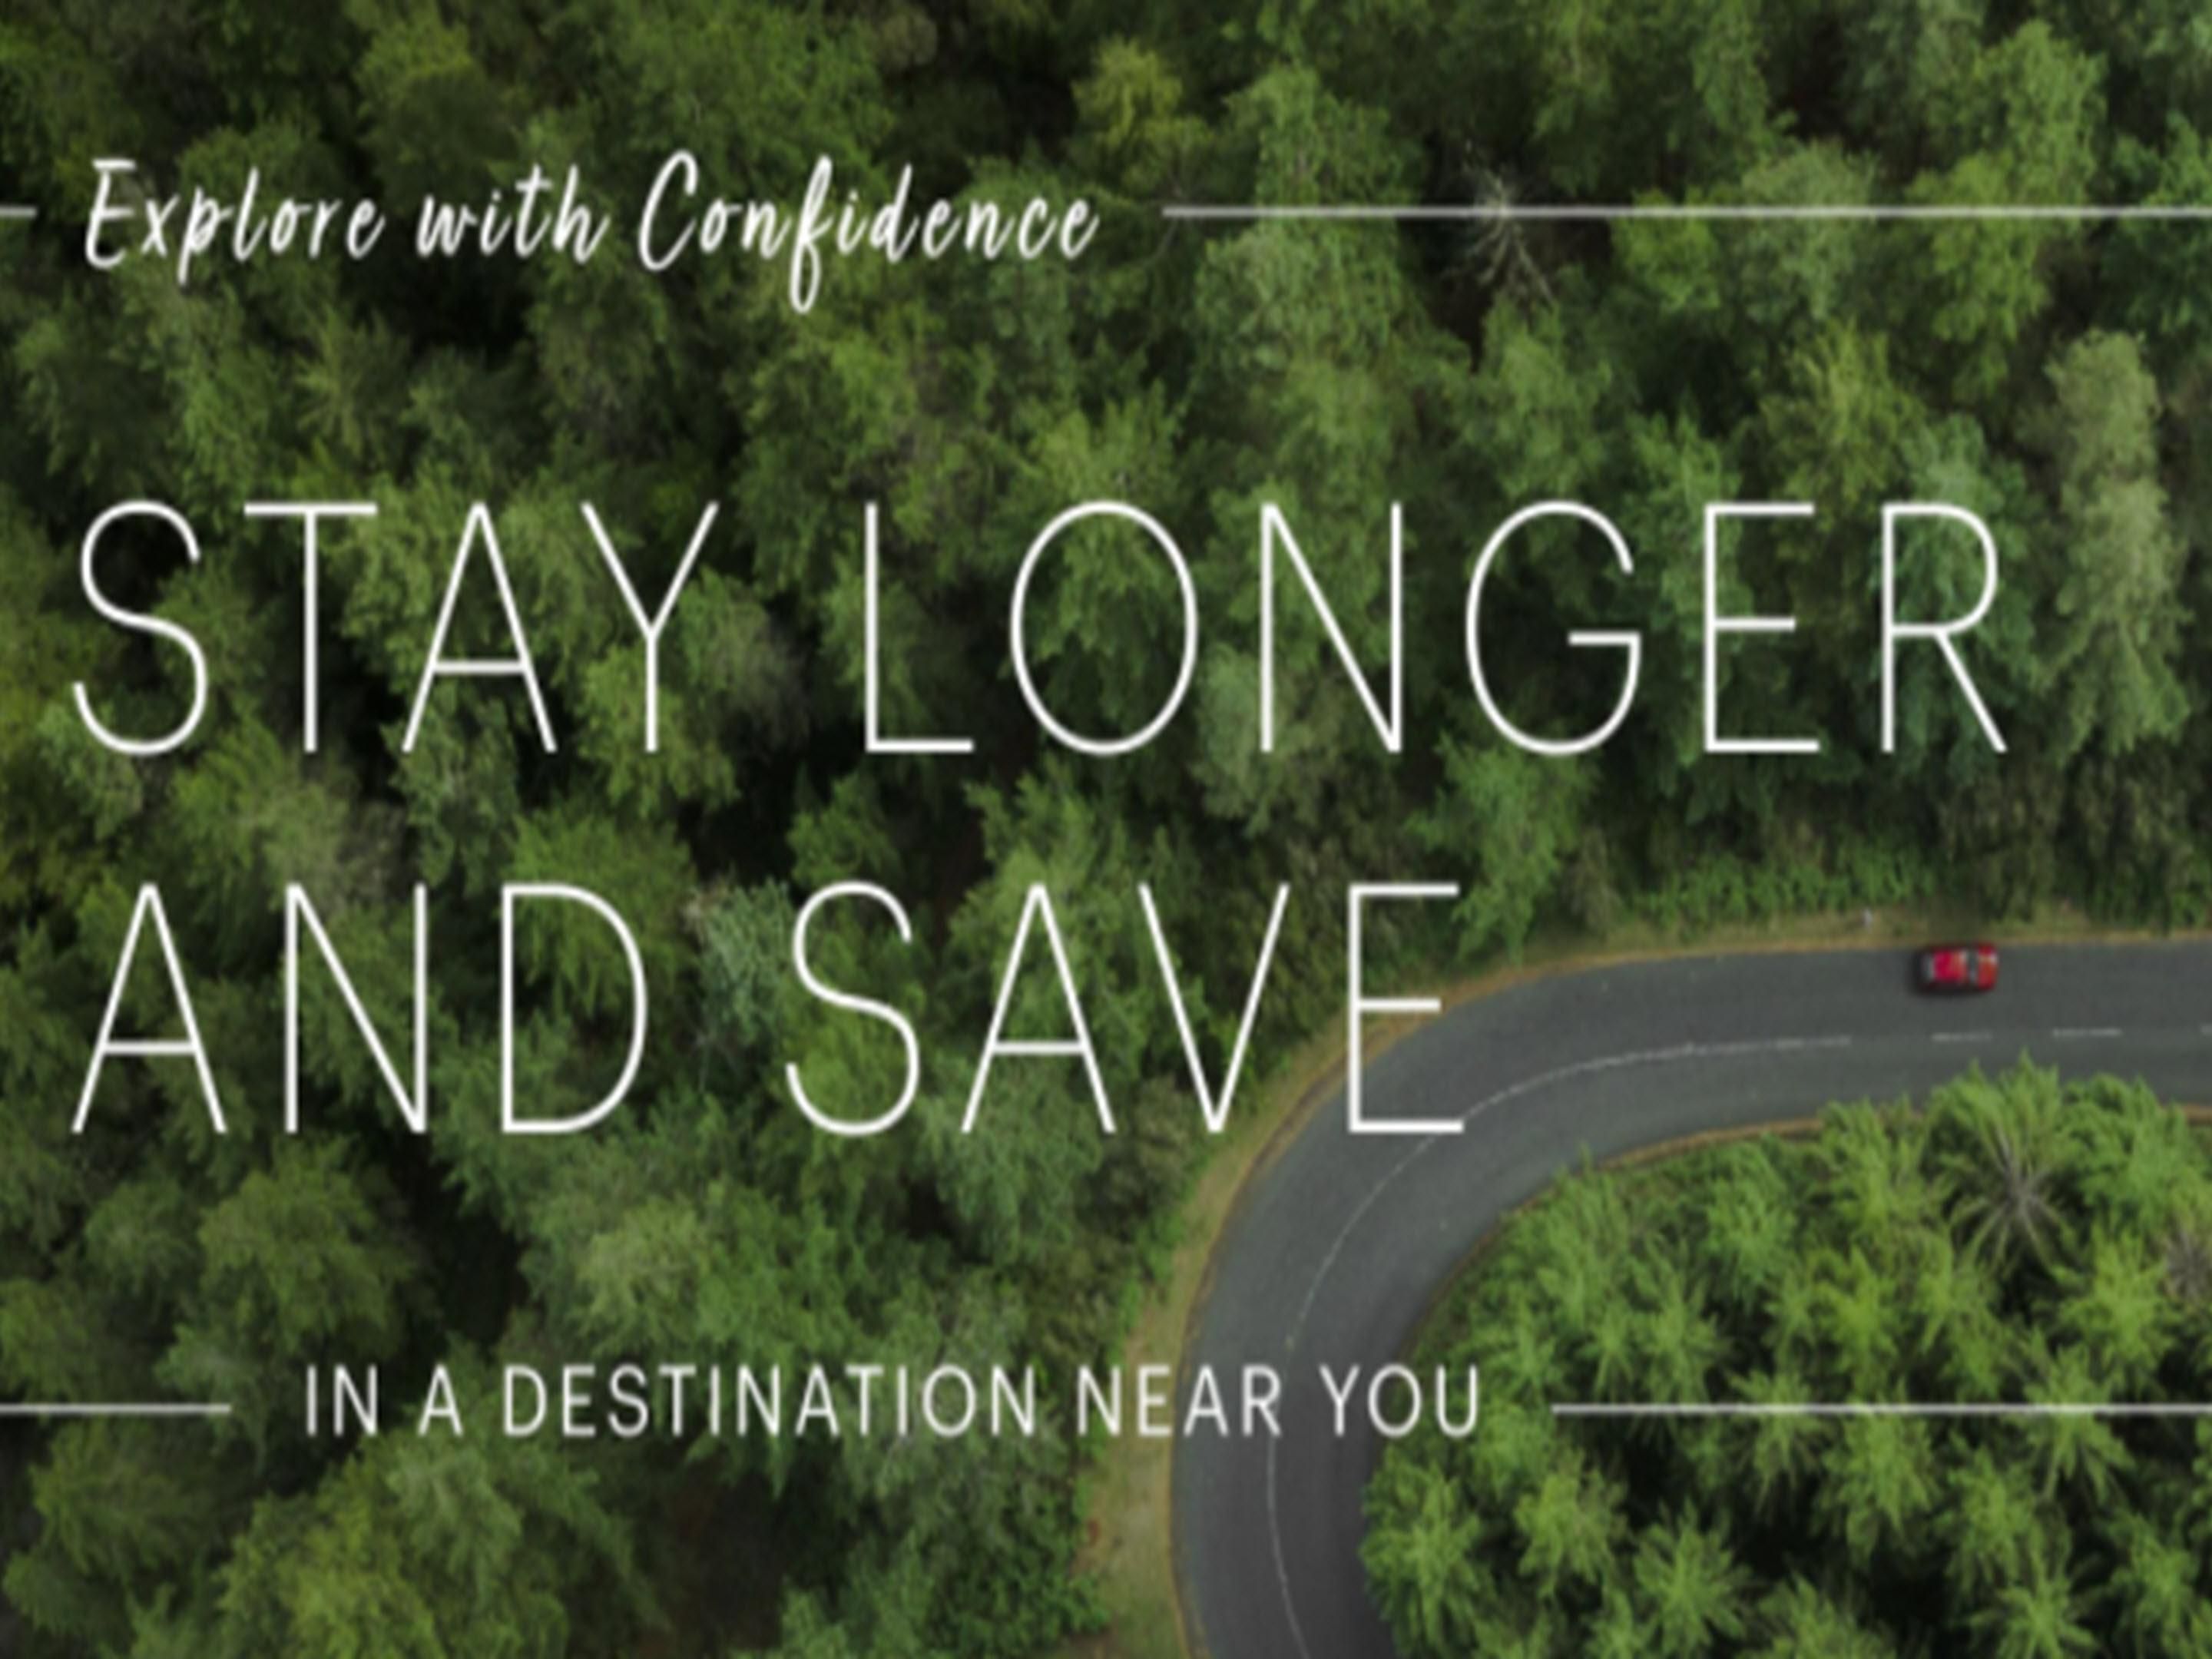 Stay Longer and Save